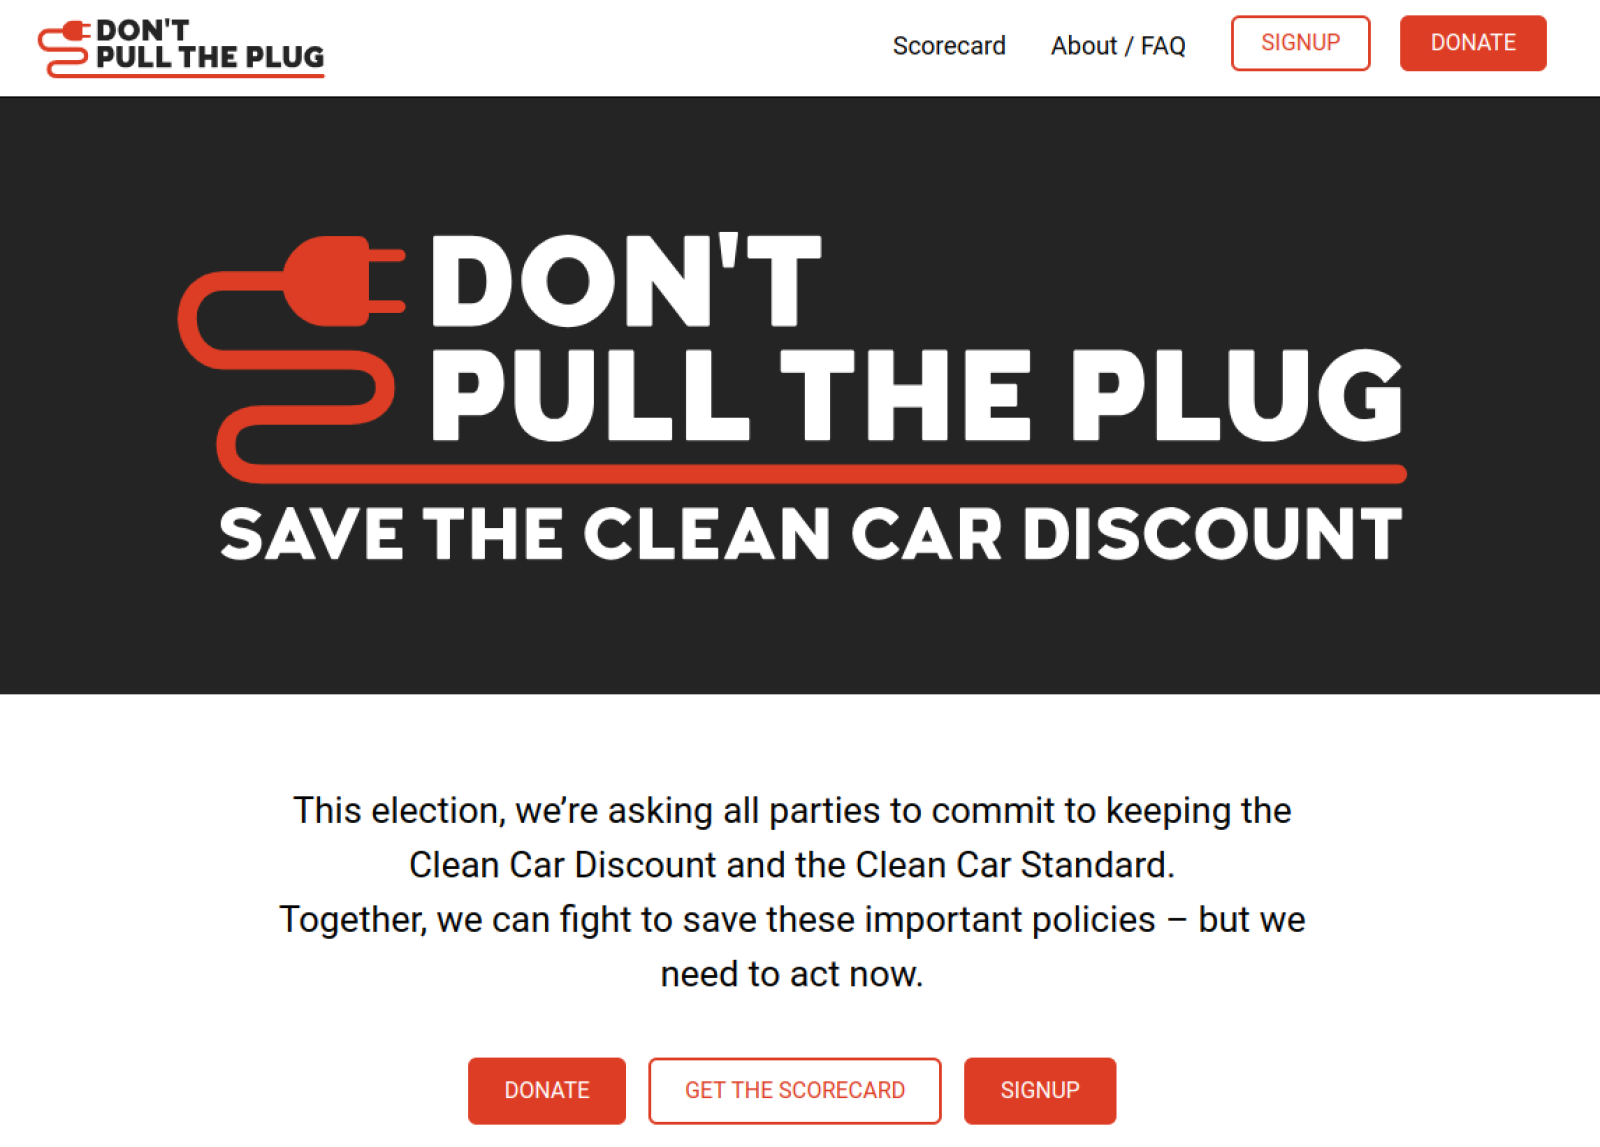 Homepage - Don't pull the plug